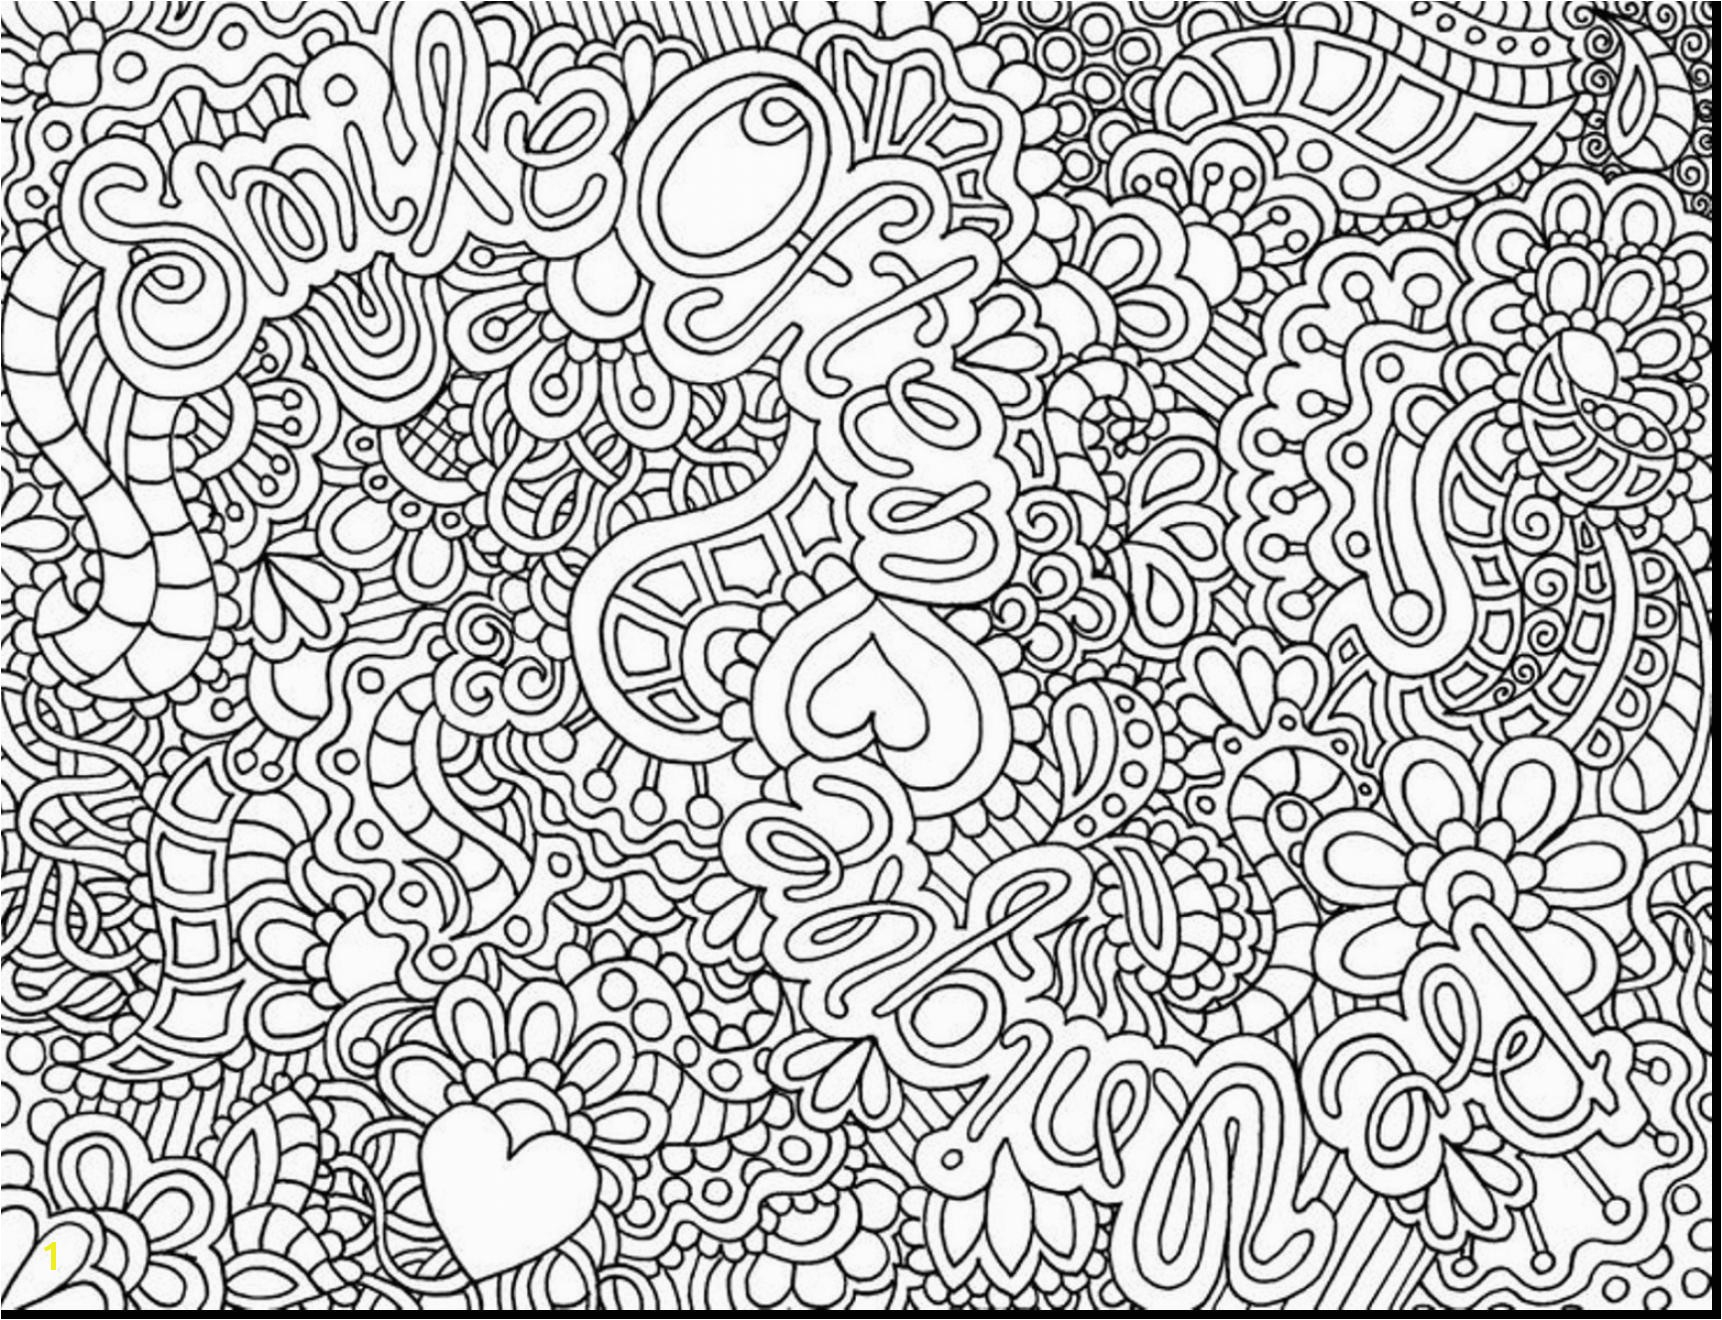 Free Mandala Coloring Pages To Print Printable Adults For Easy - Free Printable Inspirational Coloring Pages